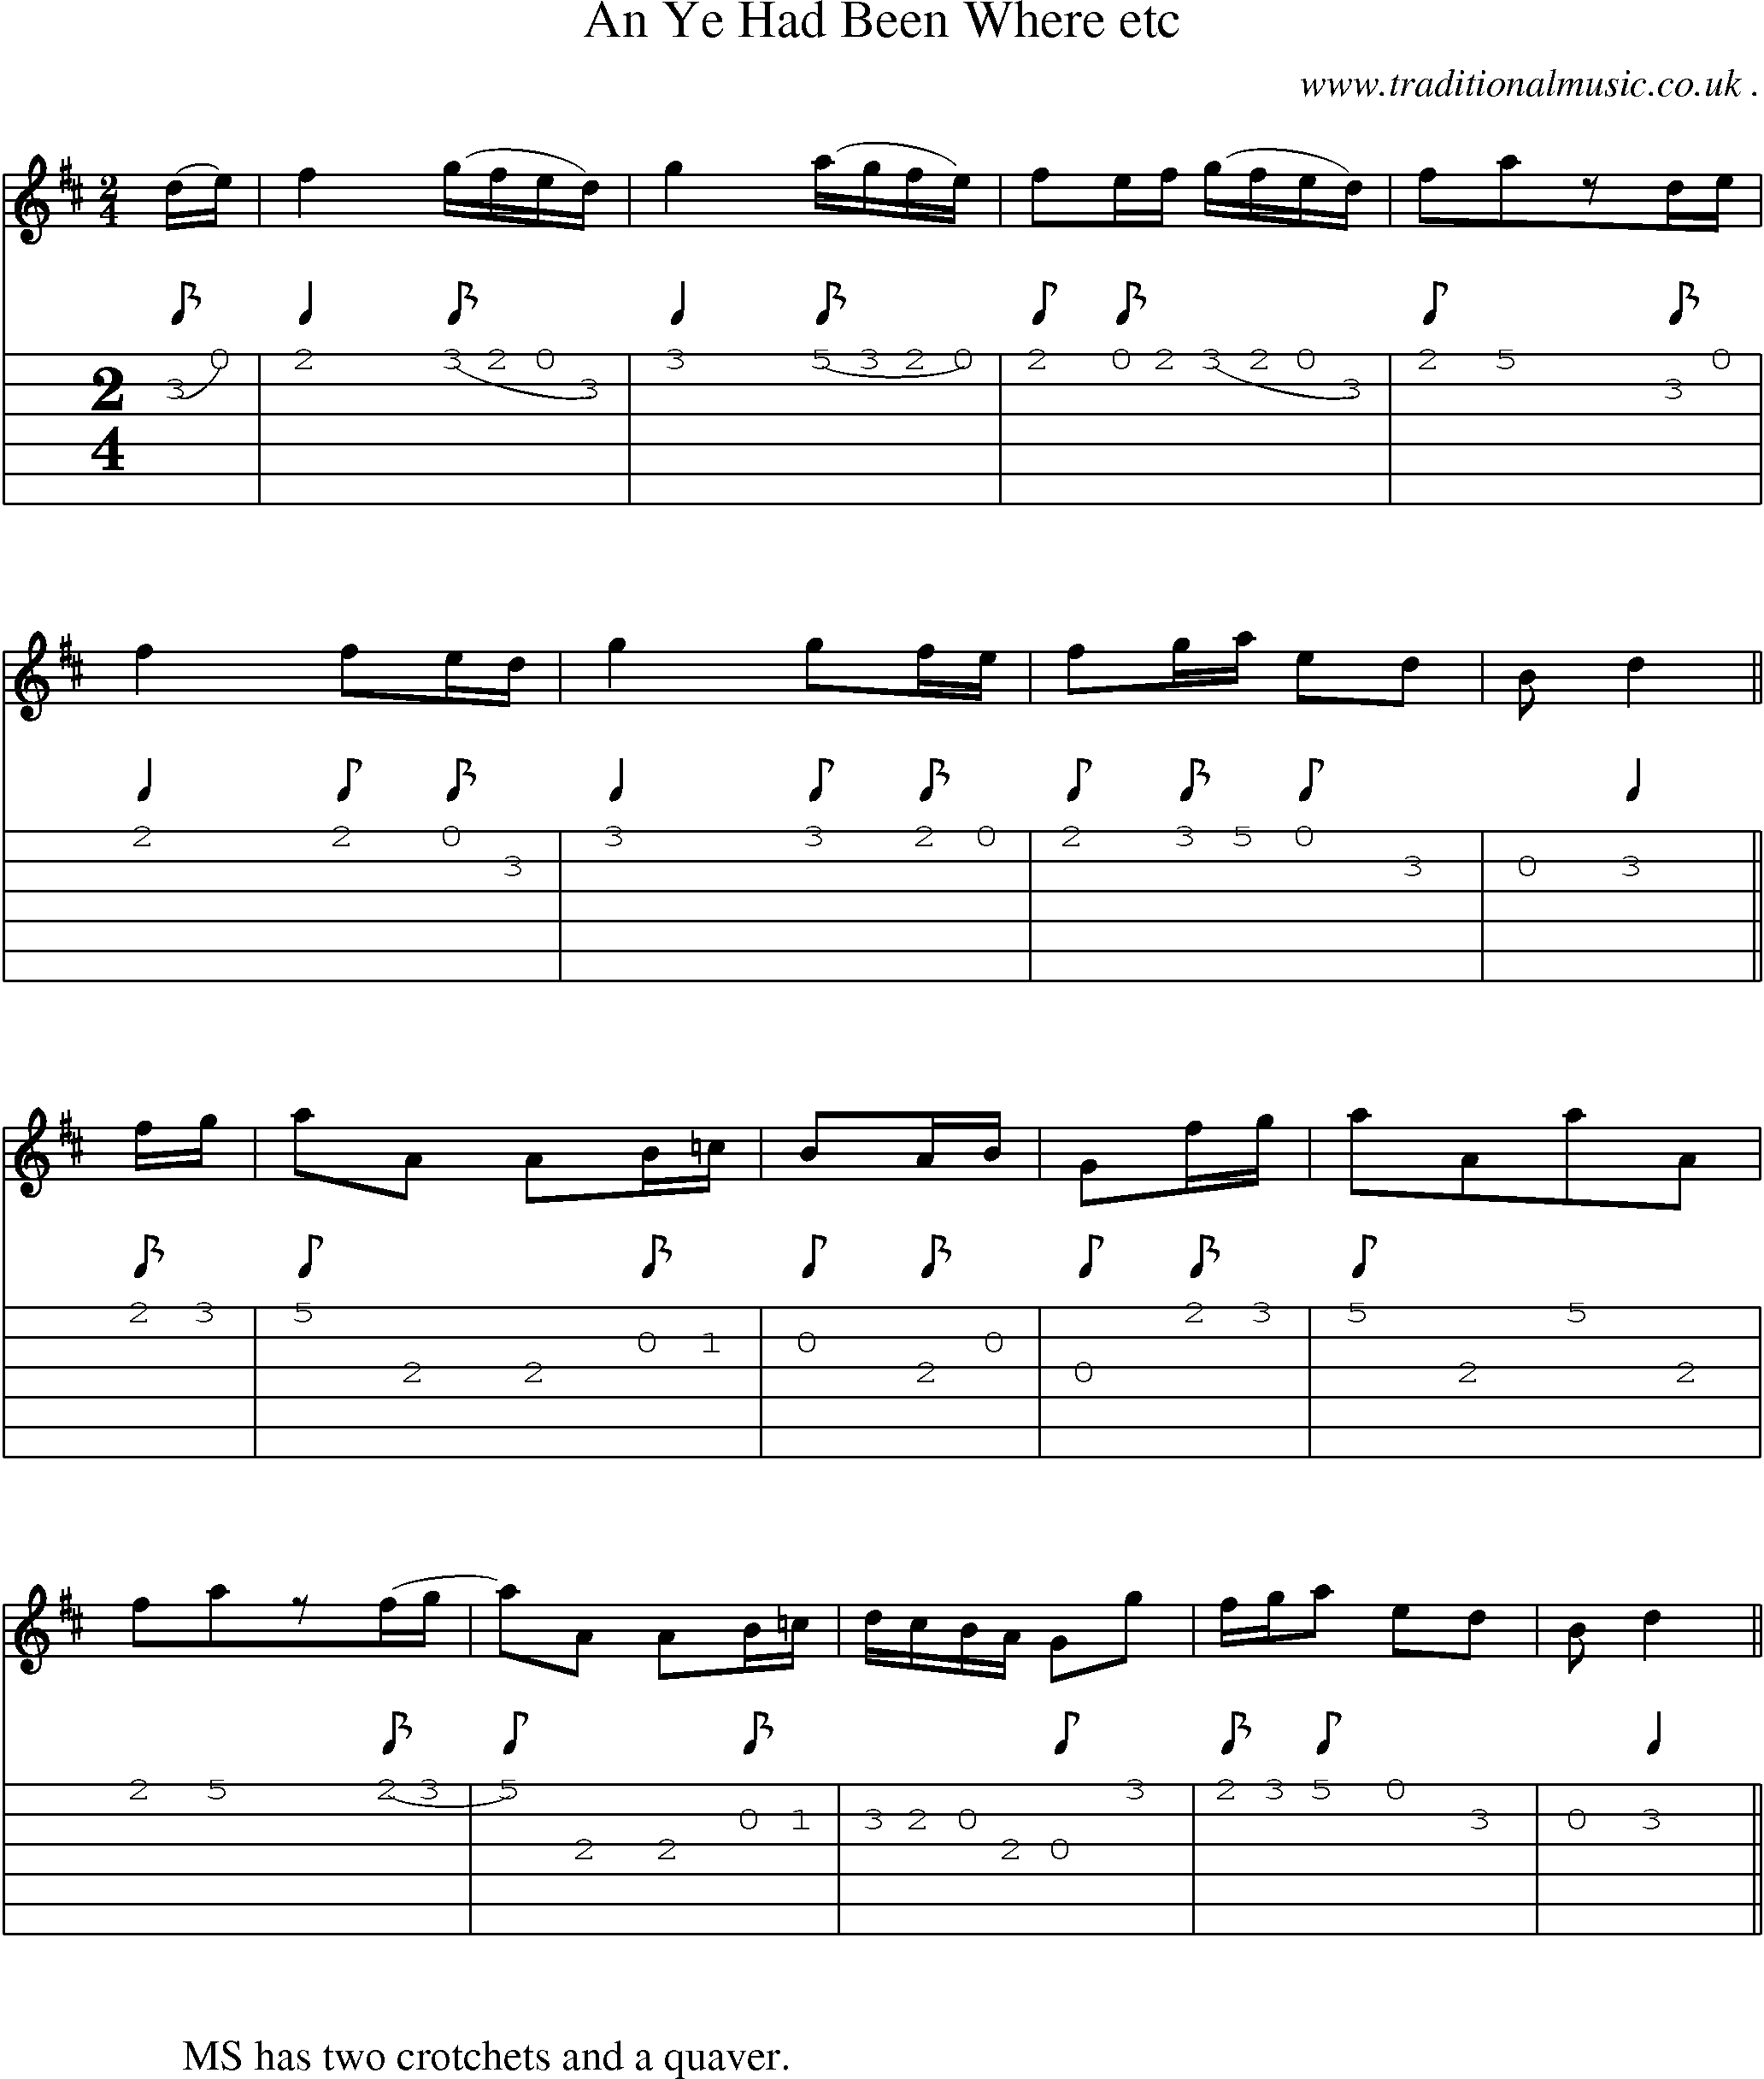 Sheet-Music and Guitar Tabs for An Ye Had Been Where Etc